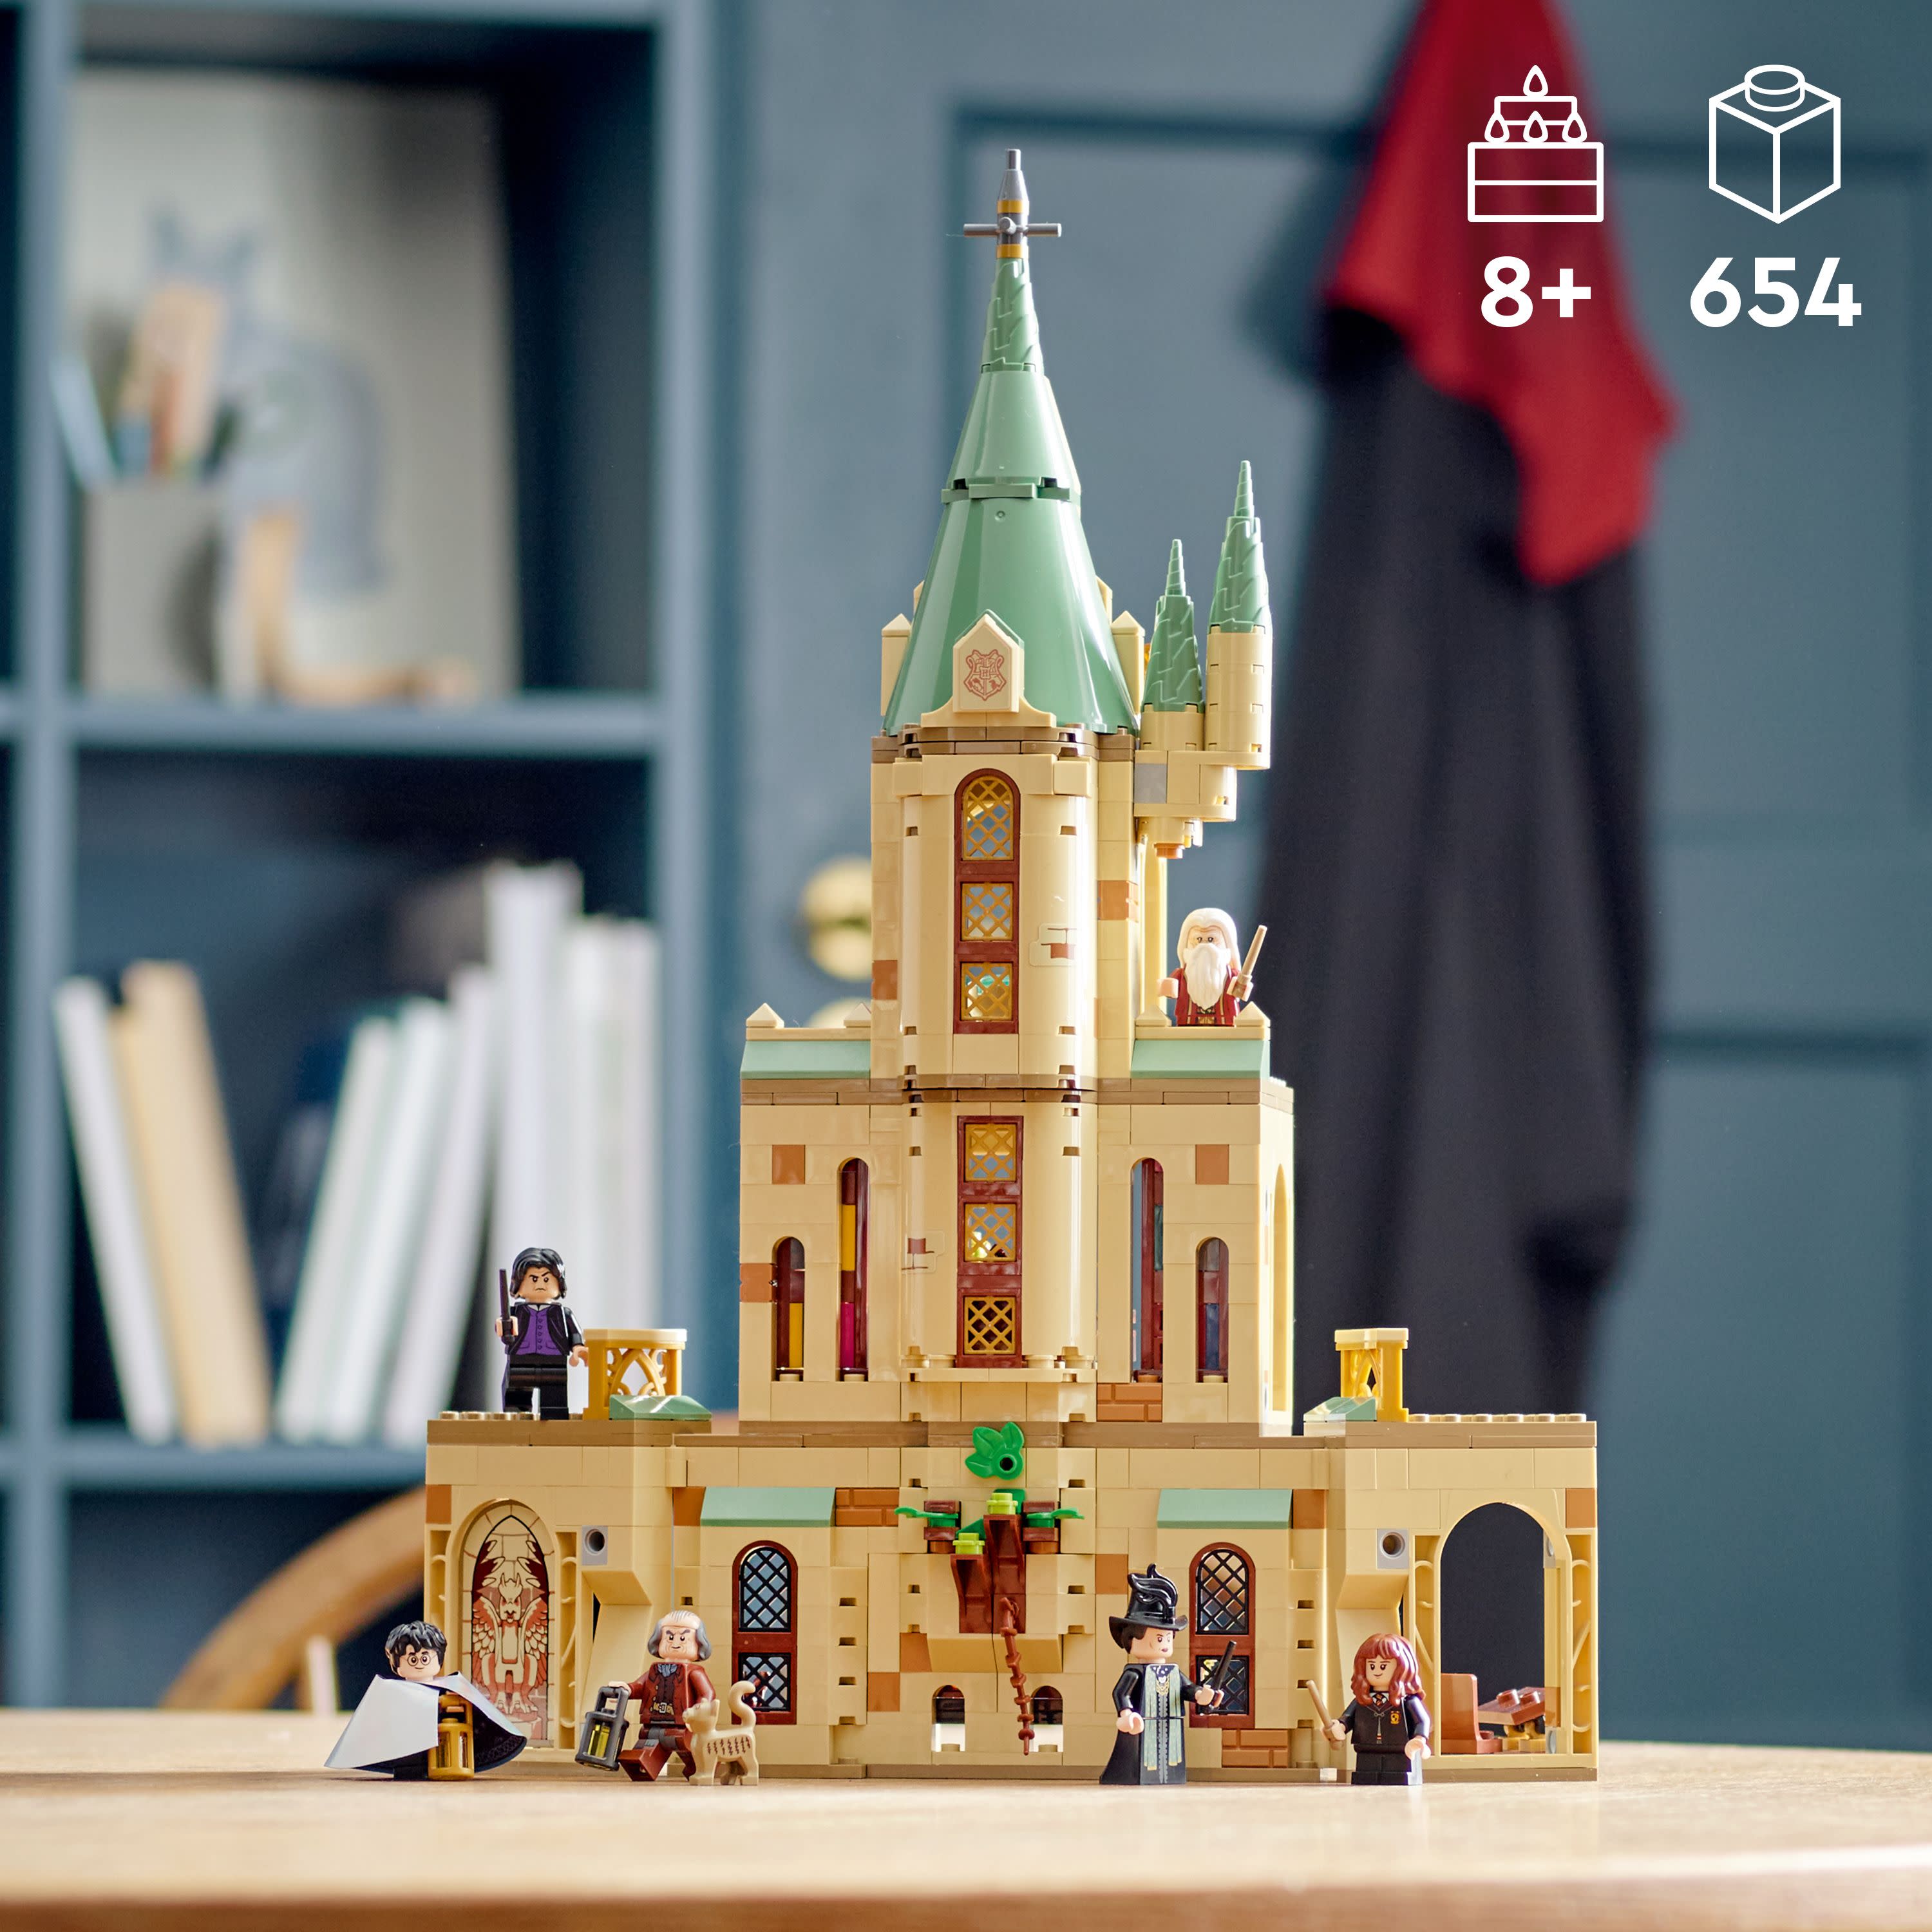 LEGO Harry Potter Hogwarts: Dumbledore’s Office 76402 Castle Toy, Set with Sorting Hat, Sword of Gryffindor and 6 Minifigures, for Kids Aged 8 Plus - image 4 of 8